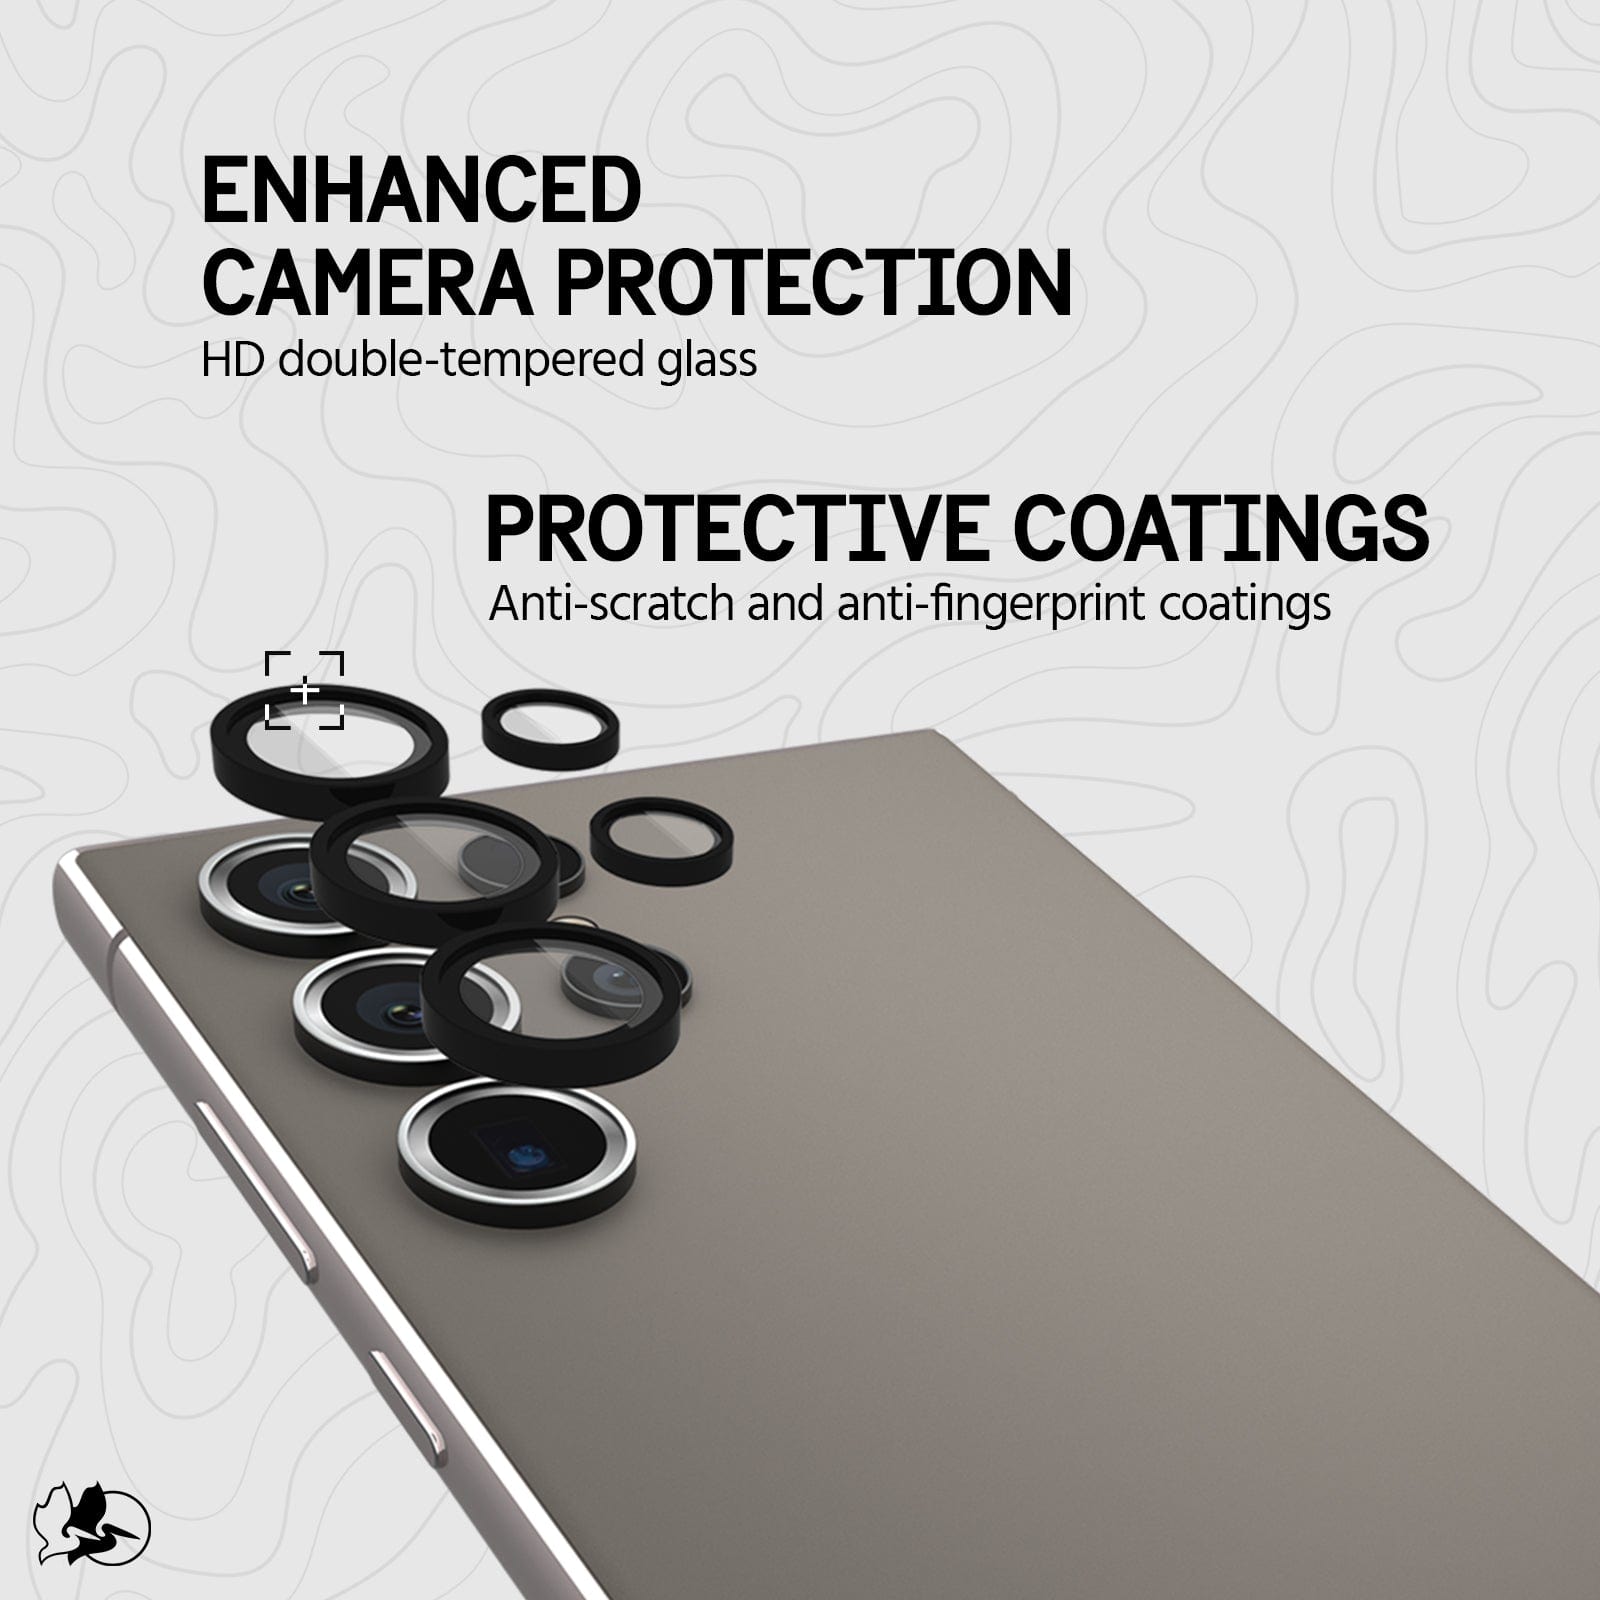 ENHANCED CAMERA PROTECTION HD DOUBLE-TEMPERED GLASS. PROTECTIVE COATINGS ANTI-SCRATCH AND ANTI-FINGERPRINT COATINGS